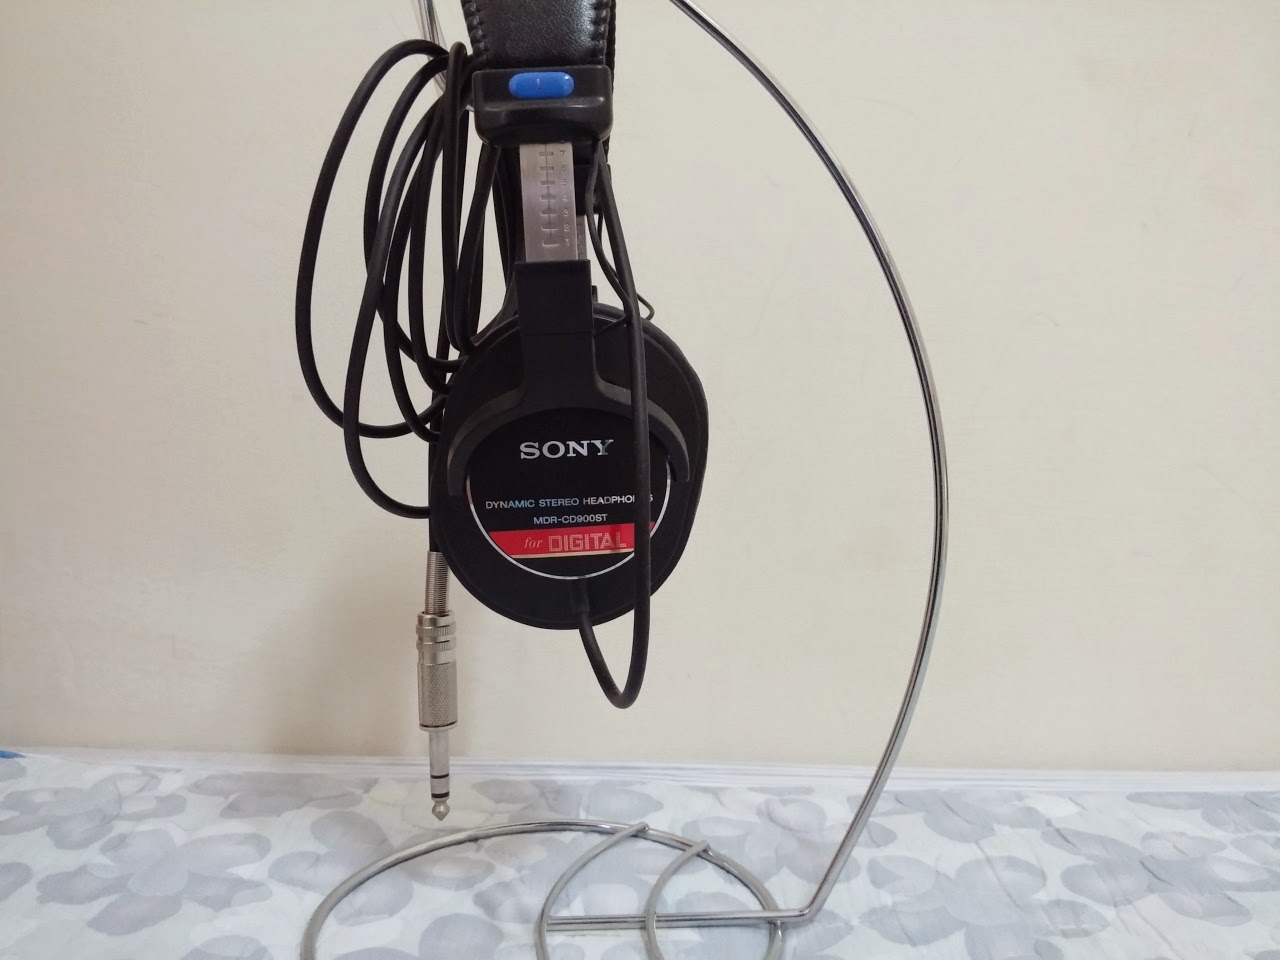 Scribe's N.E.W. Studio://Blogger: Review: SONY MDR-CD900ST 錄音室監聽耳罩耳機